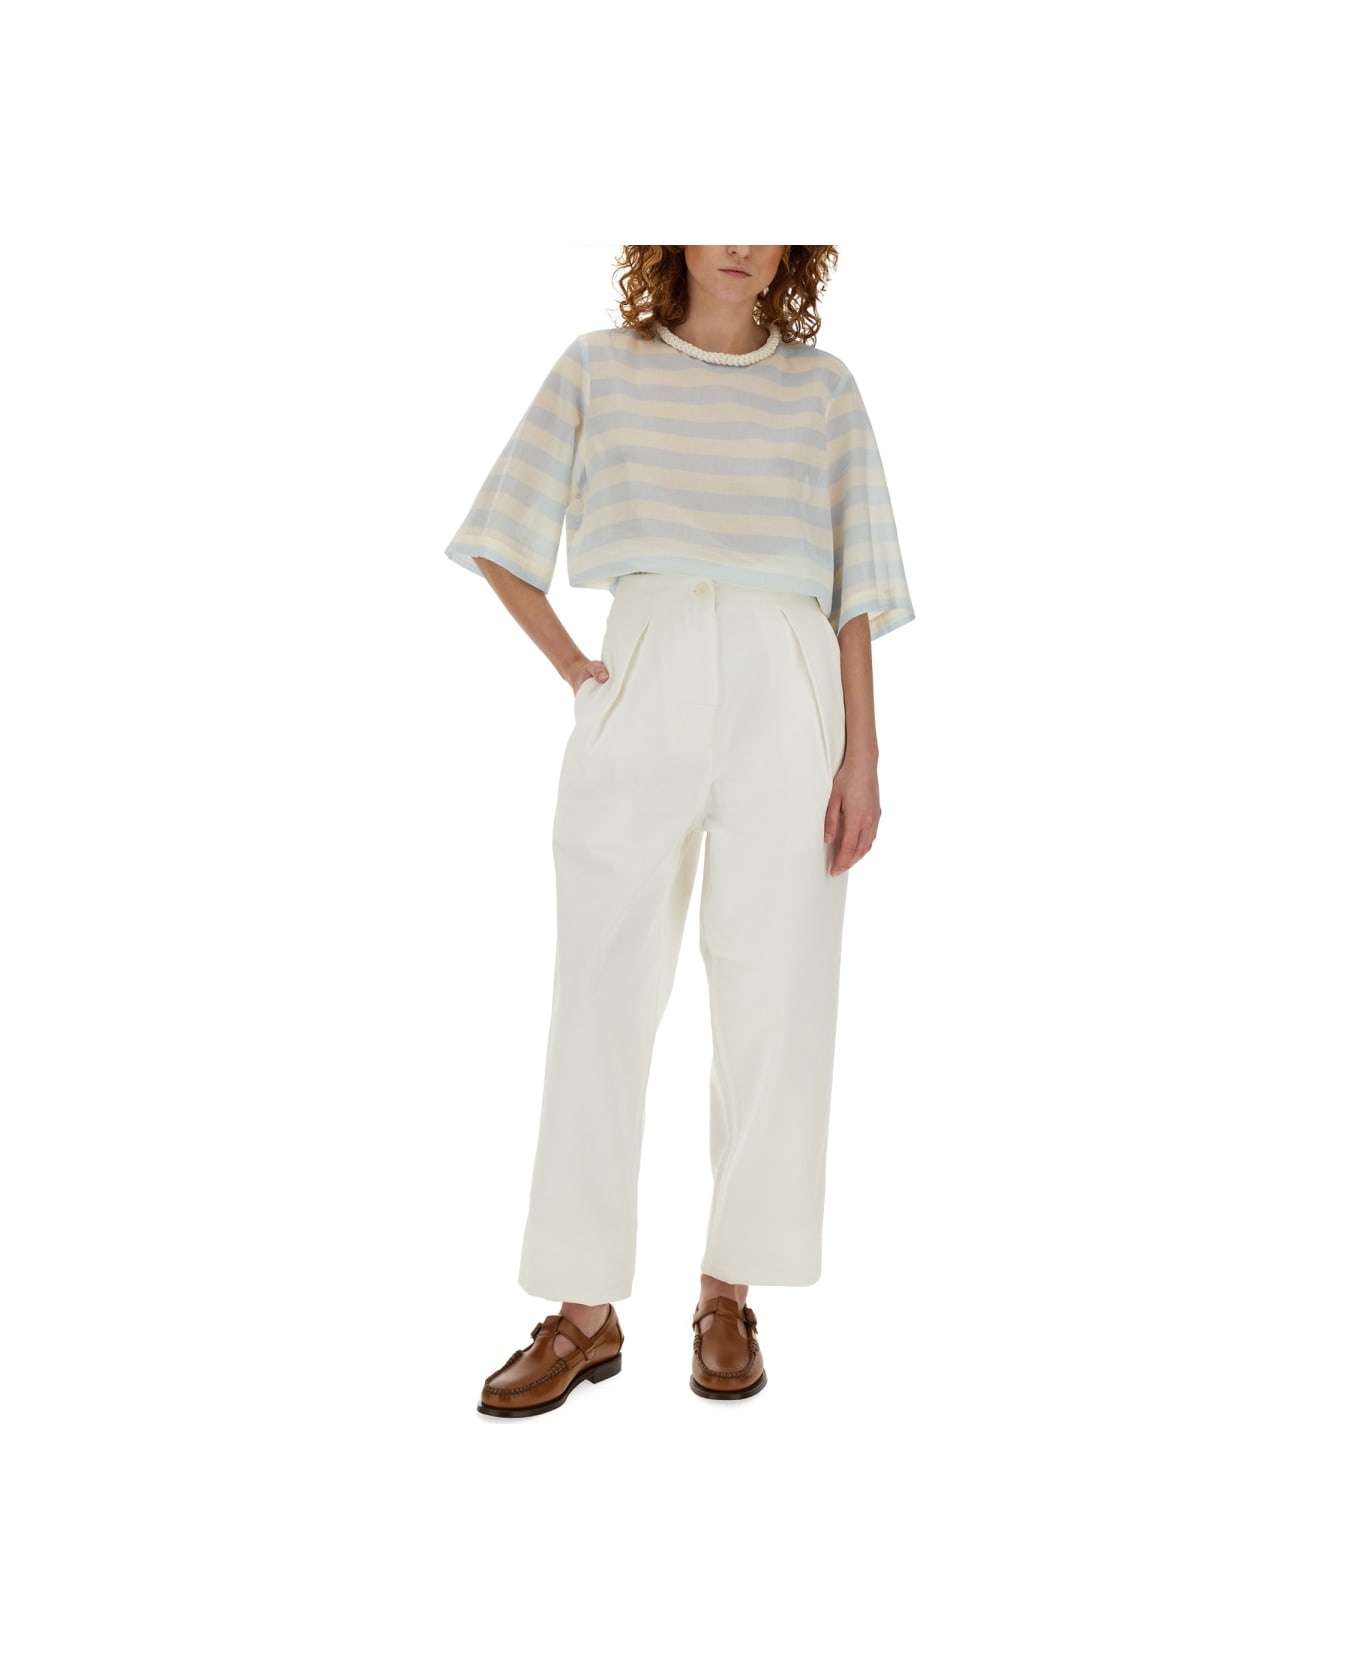 Alysi Striped Tops. - BABY BLUE